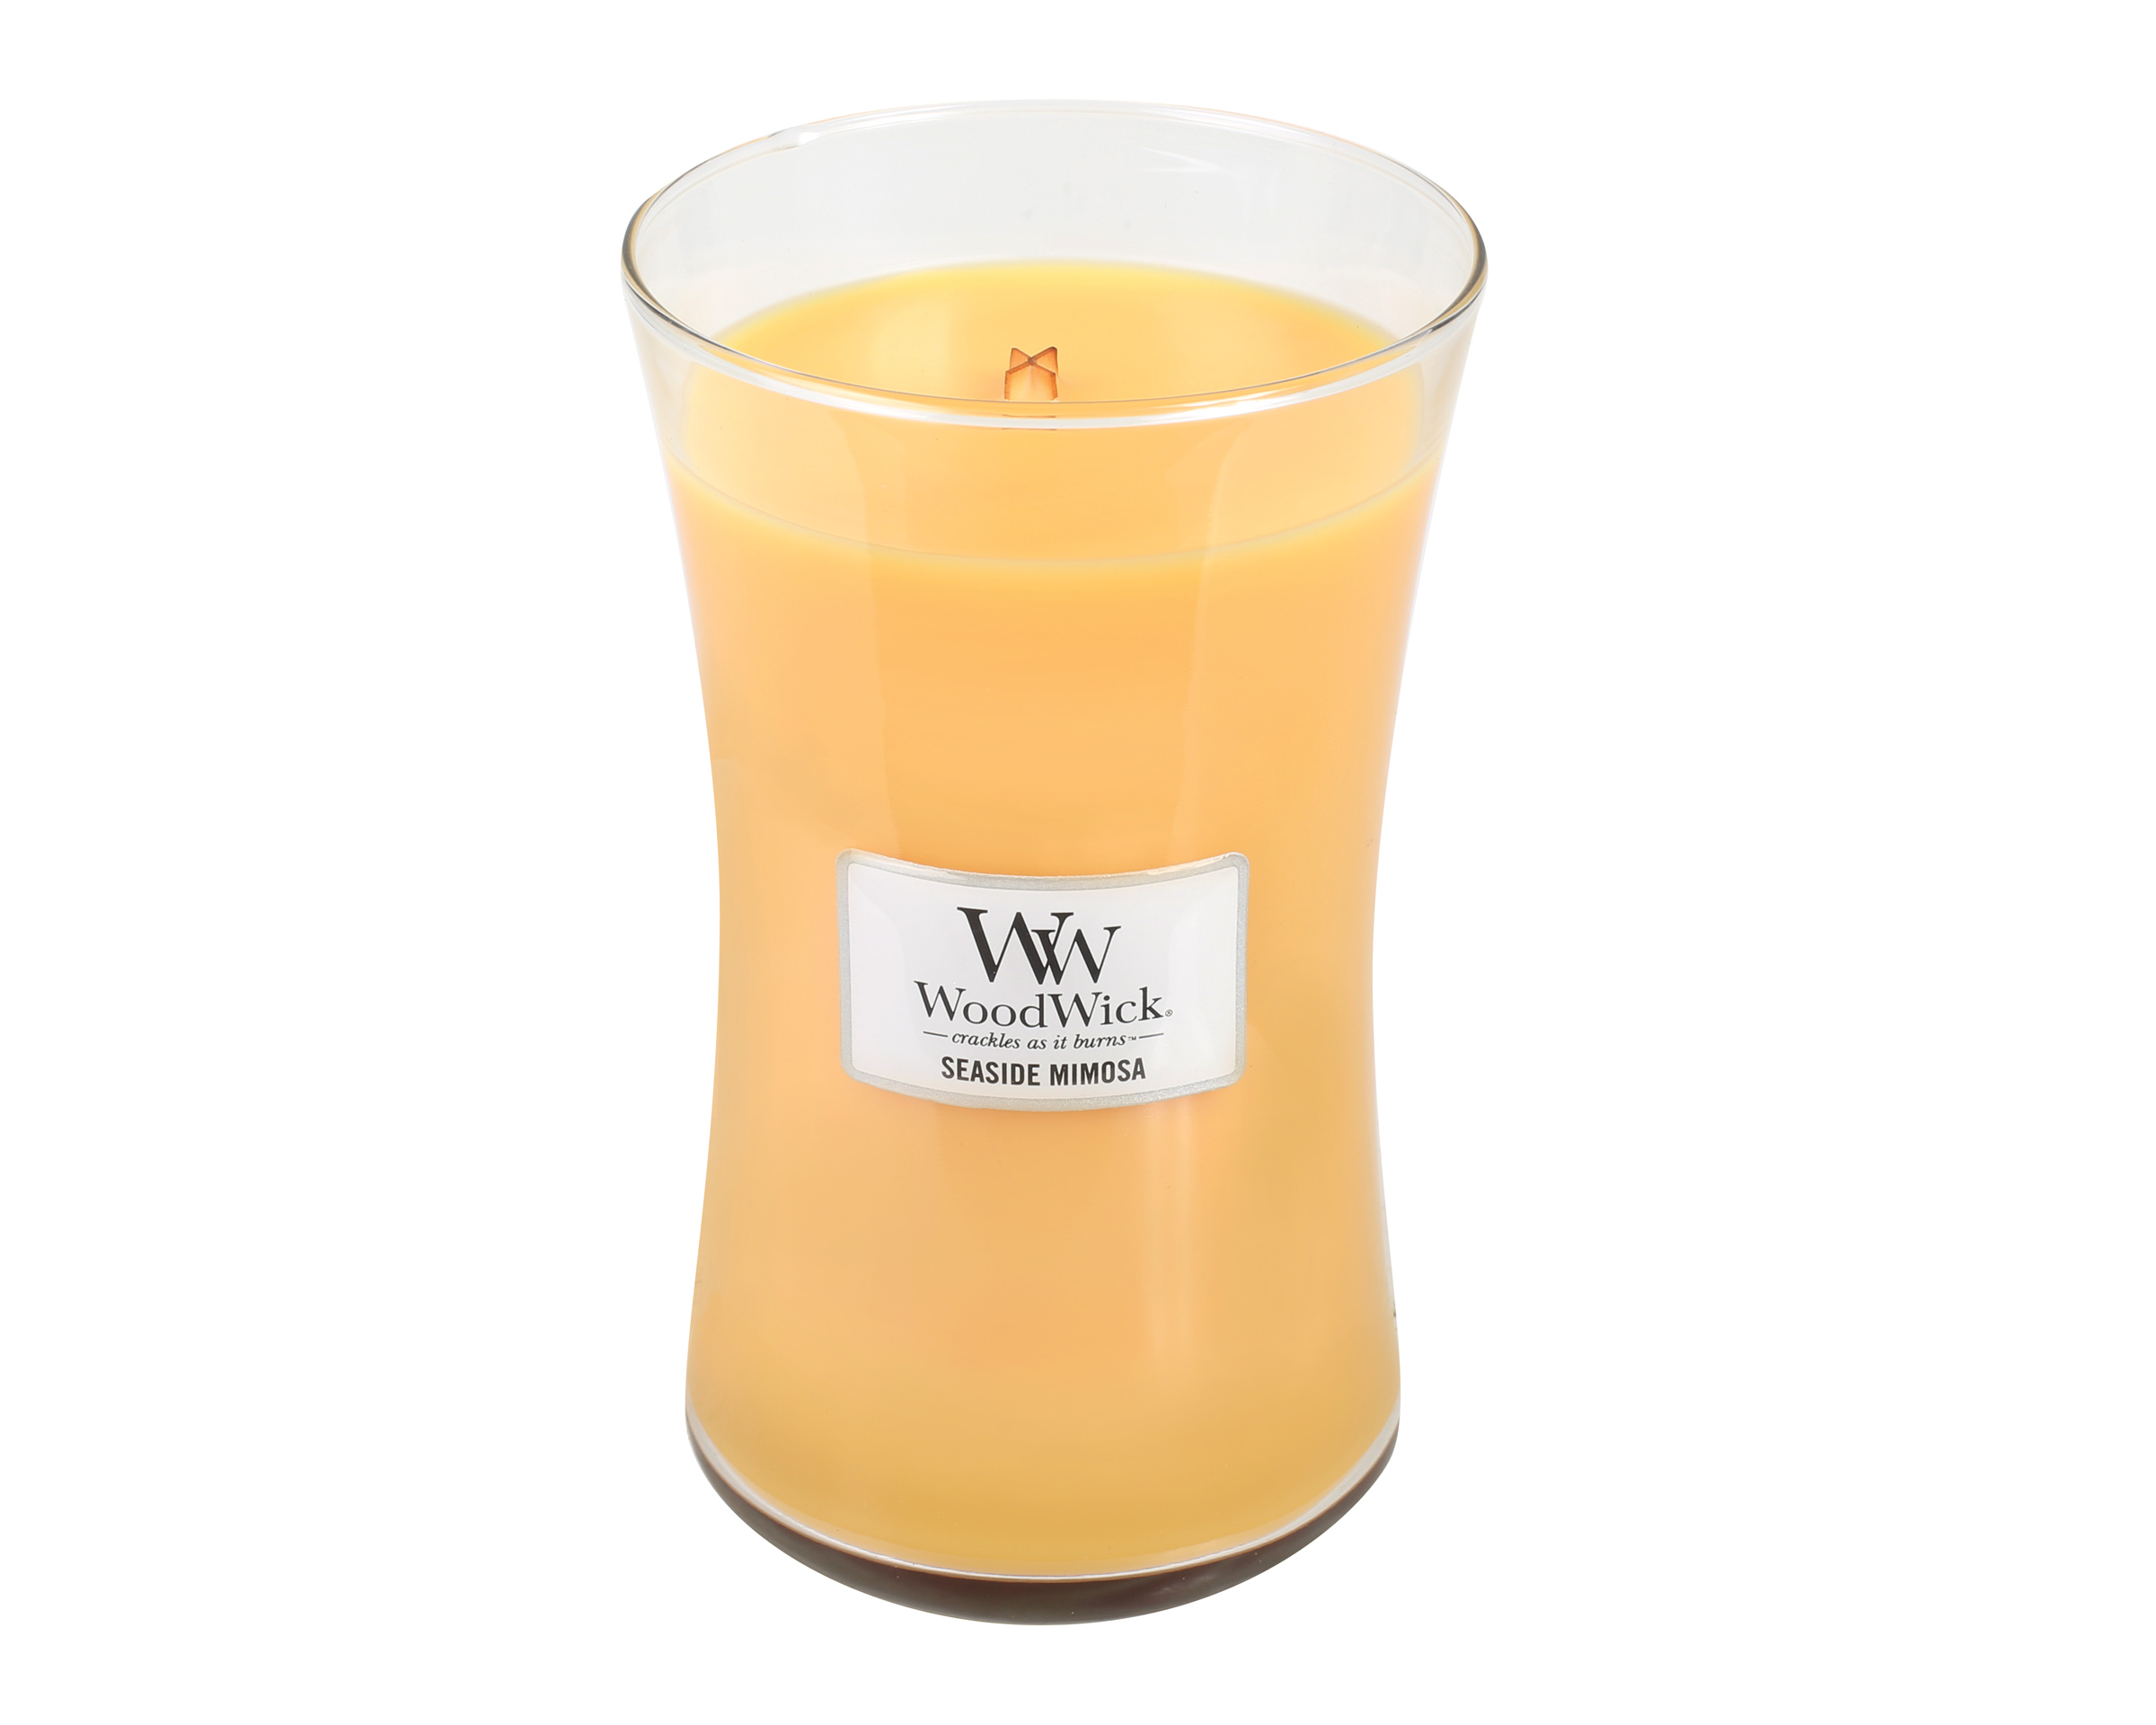 https://www.warentuin.nl/media/catalog/product/S/C/SCAN5038581054834_2_woodwick_home_fragrance_seaside_mimosa_large_candle_woodwic_0f9b.jpg